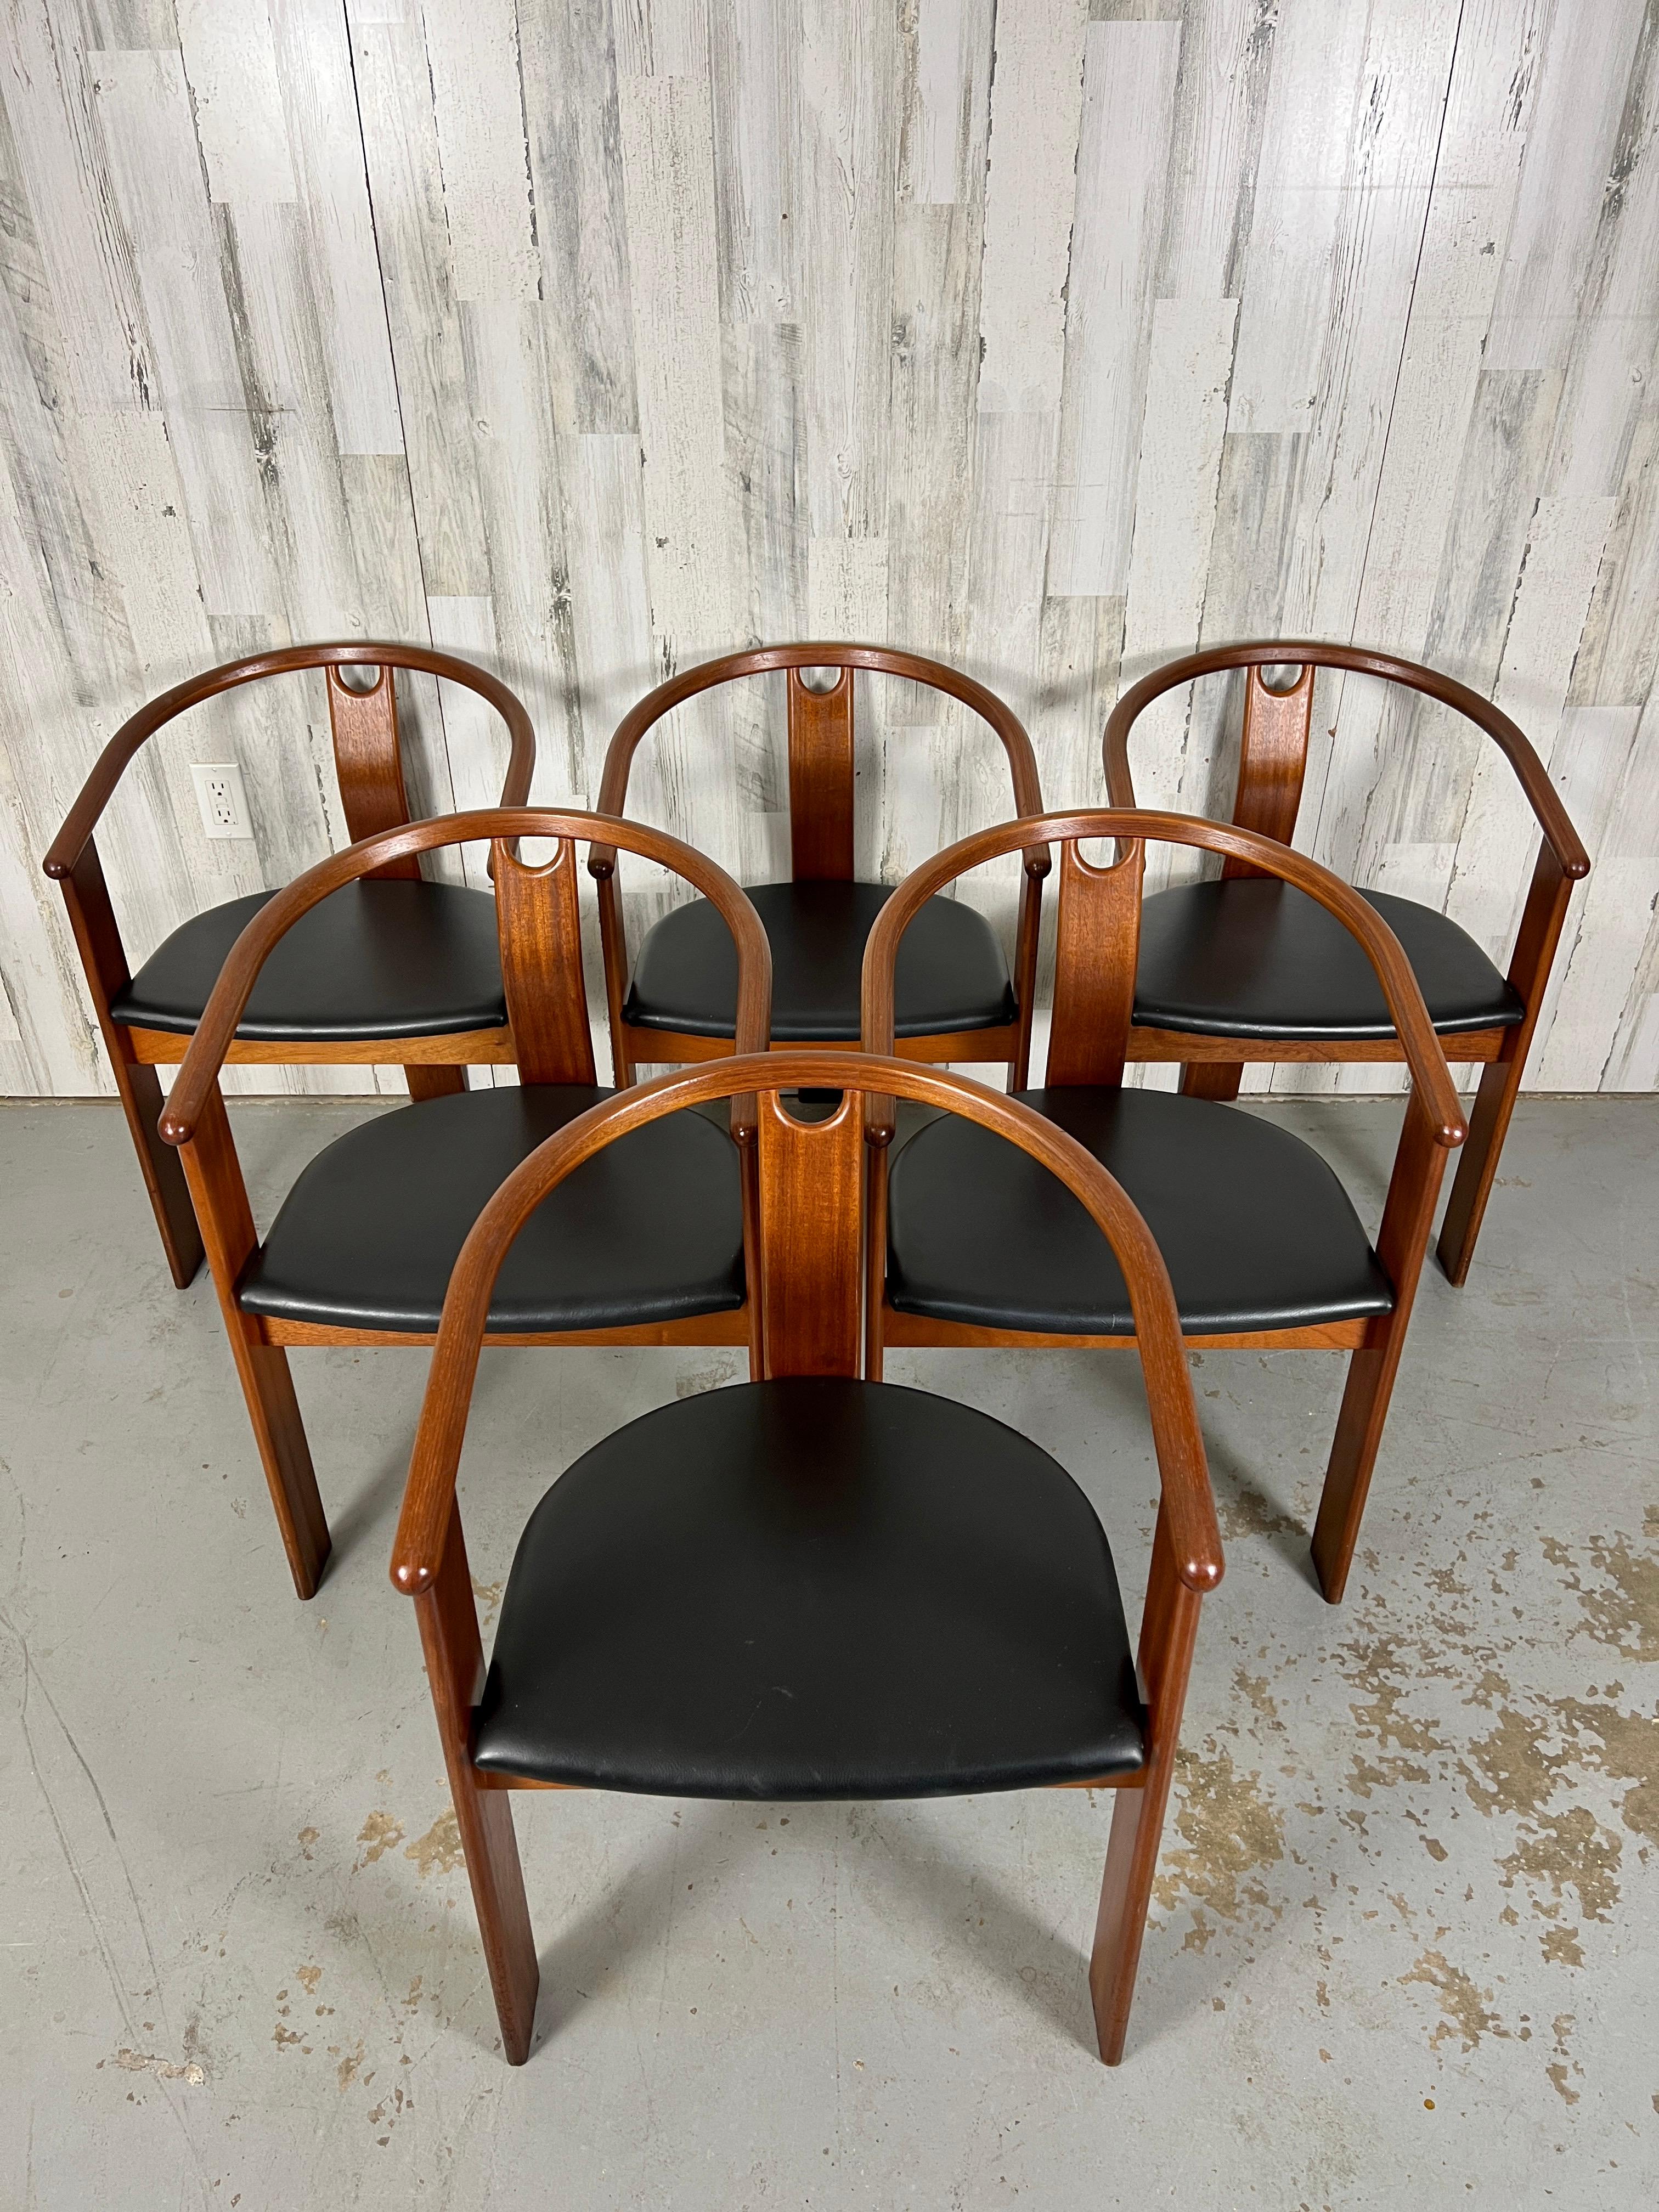 20th Century Landerholm & Lund for Fredericia Stolefabrik Tripod Dining Chairs For Sale